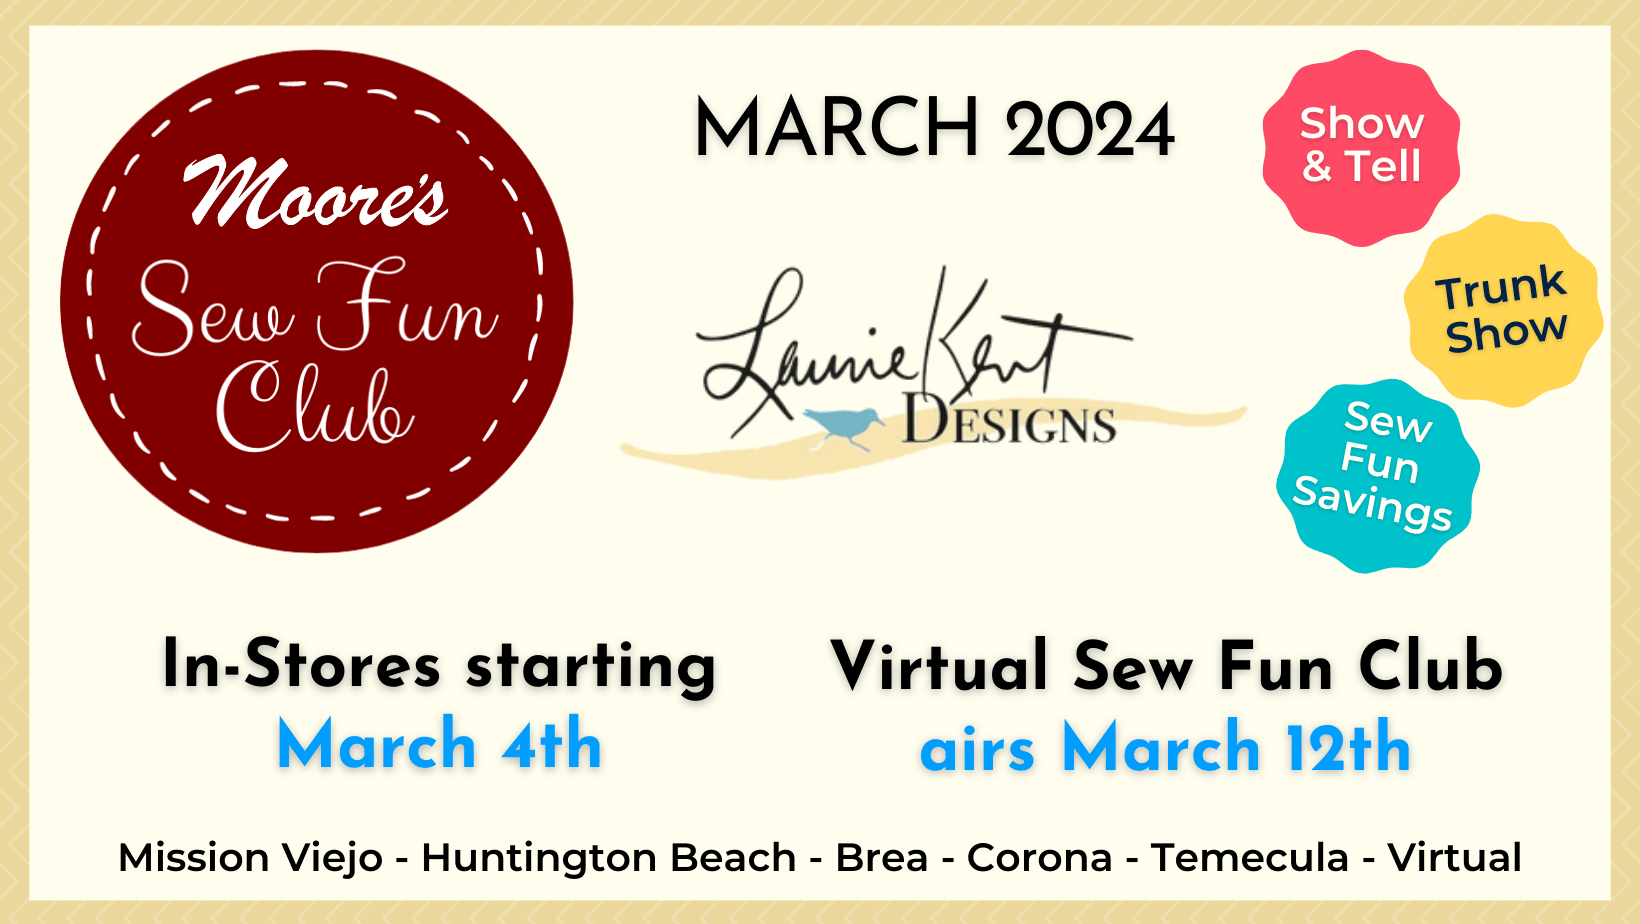 Sew Fun Club info card for March 2024 featuring Laurie Kent Designs